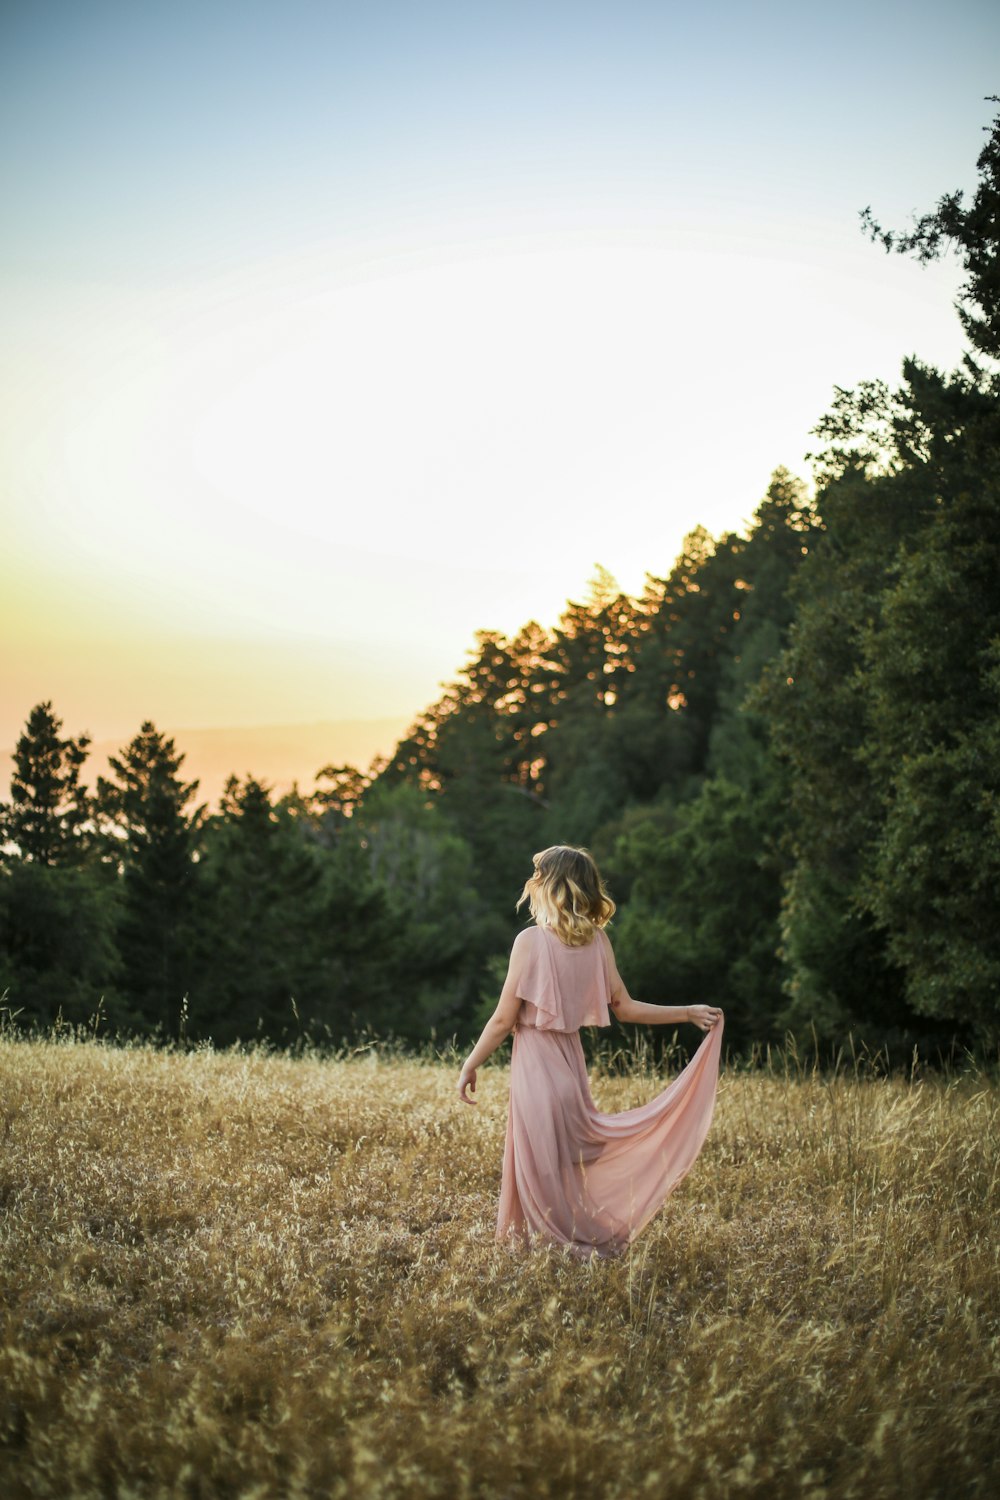 woman in pink dress standing on brown grass field during daytime